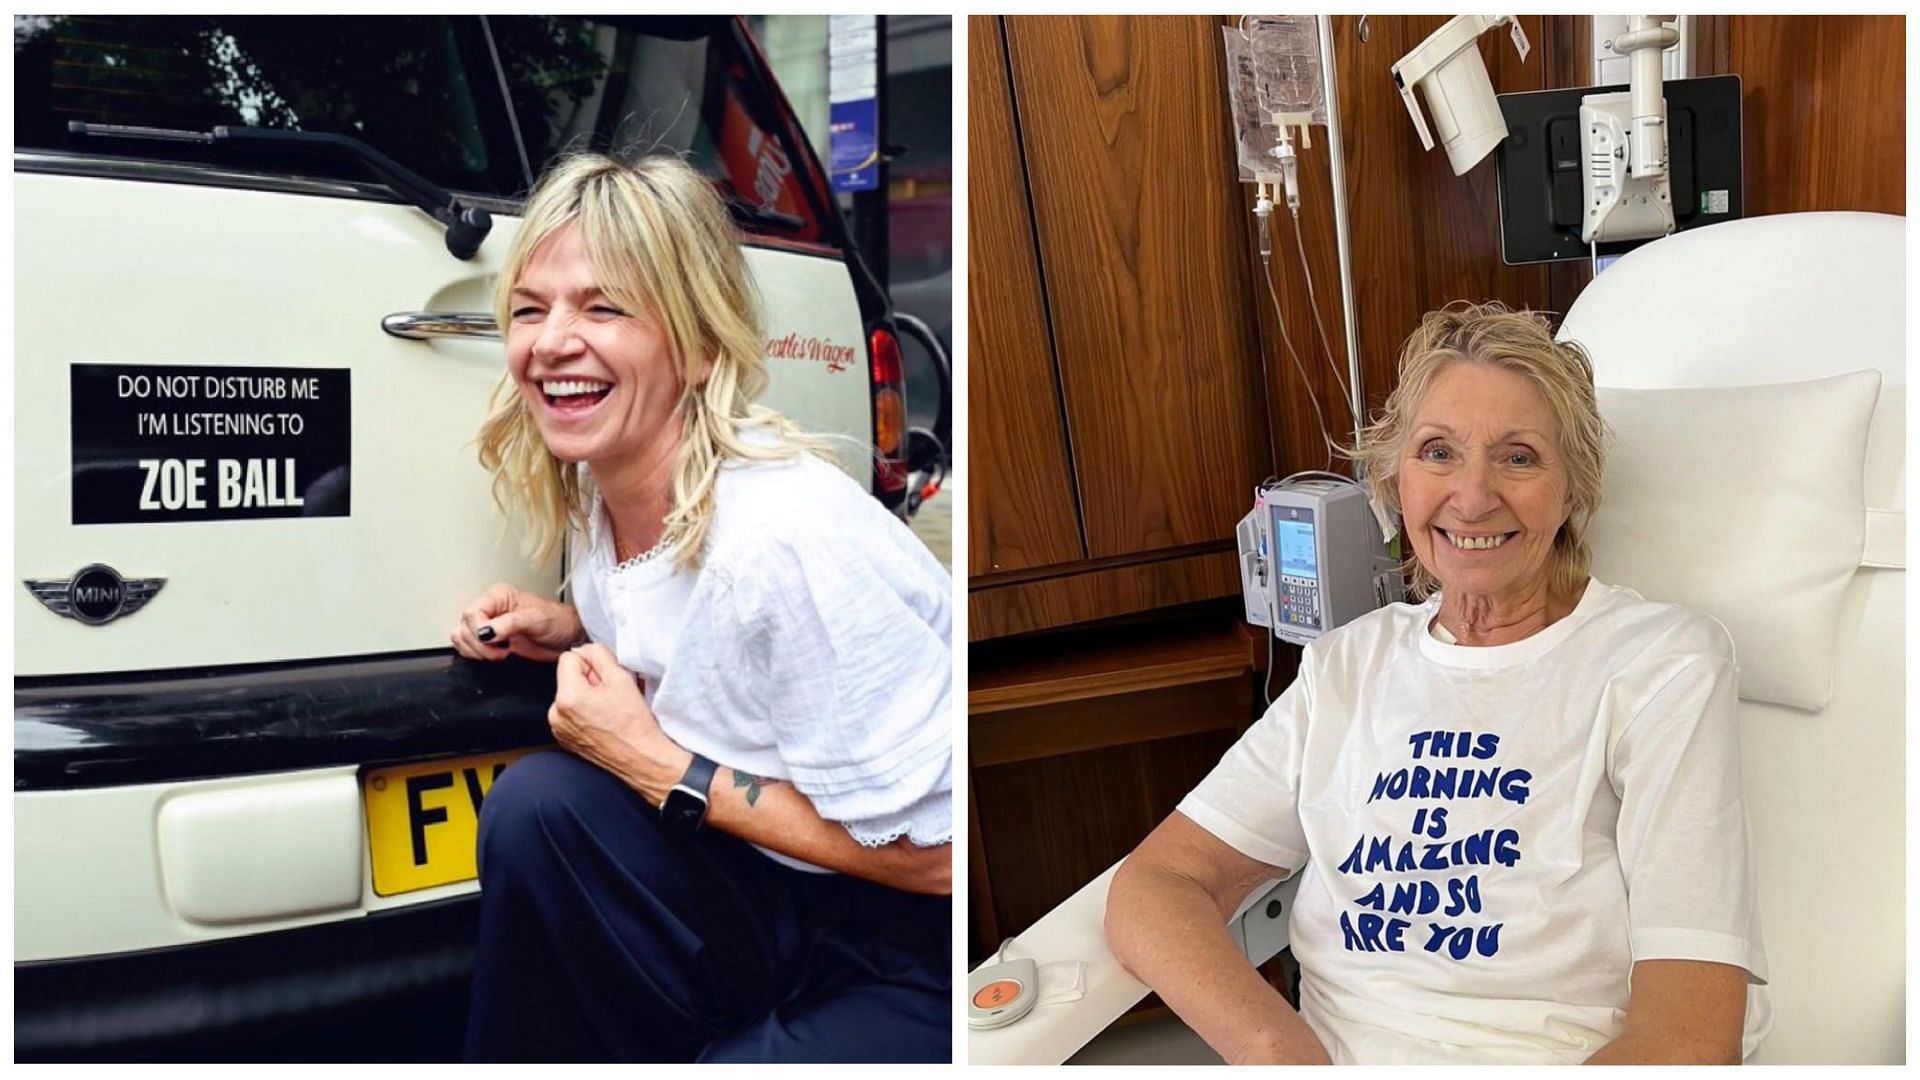 Zoe Ball, BBC Radio 2 presenter, to most likely take a sabbatical from the show after her mother